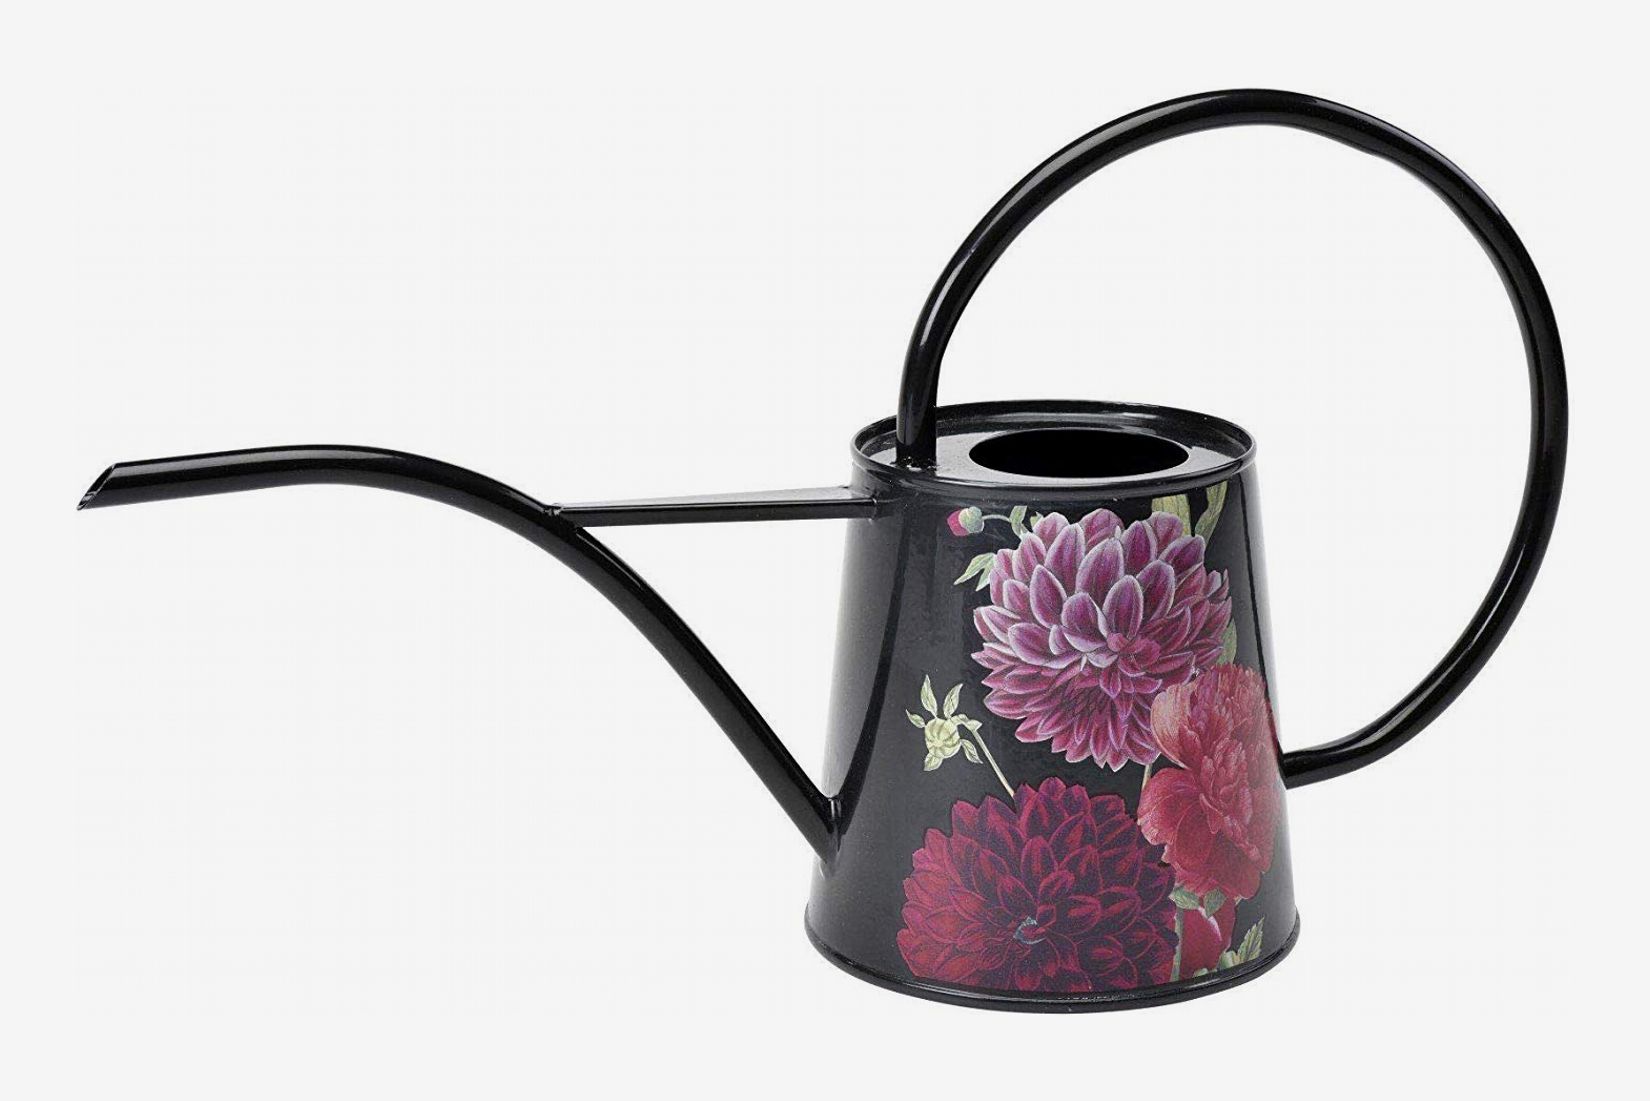 500ml Gold Watering Kettle Can Pot Stainless Steel Gardening Household Shower Watering Flower